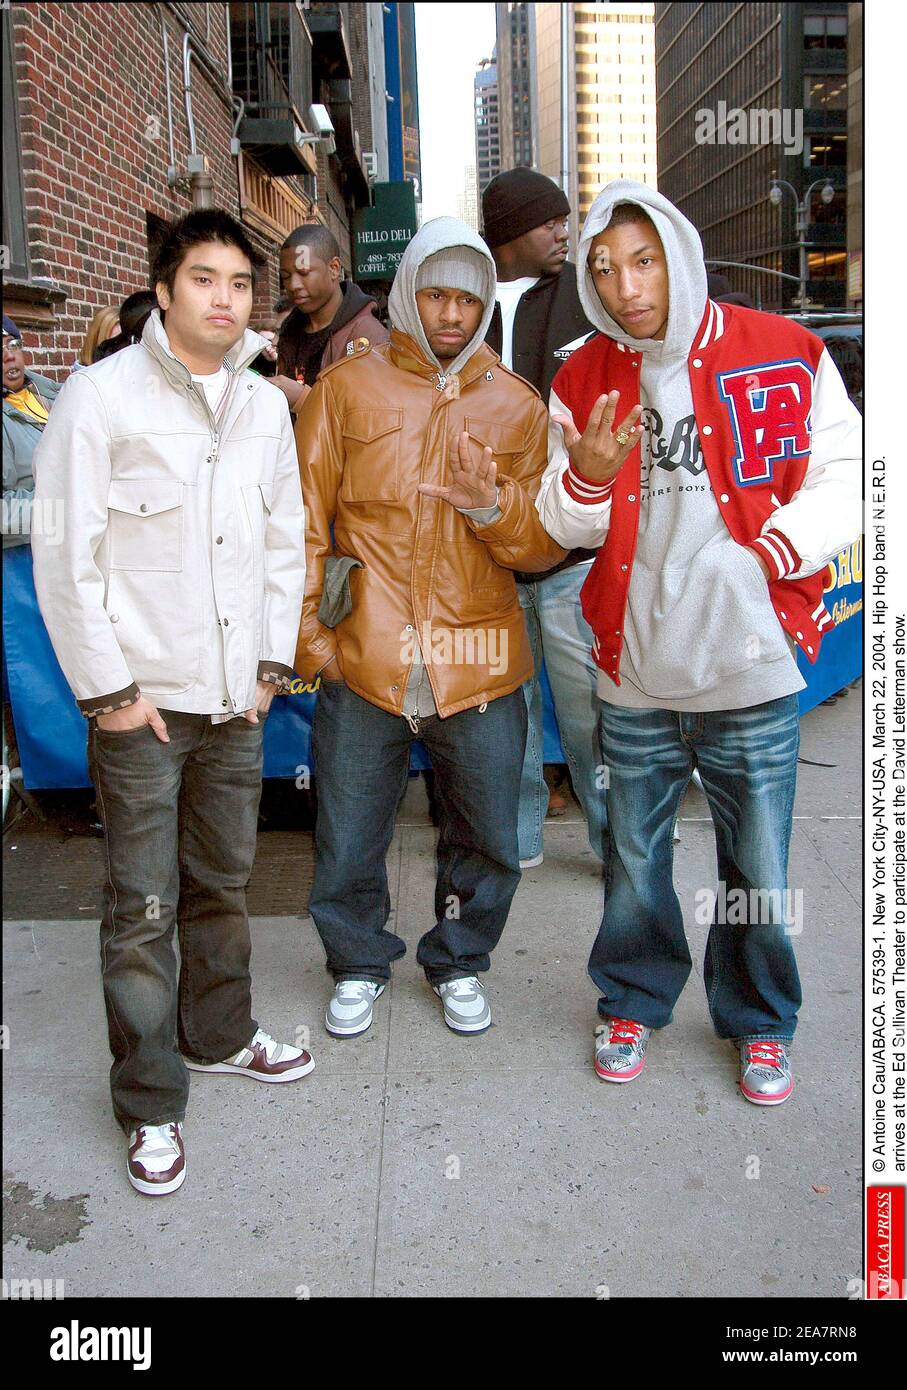 © Antoine Cau/ABACA. 57539-1. New York City-NY-USA, March 22, 2004. Hip Hop band N.E.R.D. arrives at the Ed Sullivan Theater to participate at the David Letterman show. Stock Photo